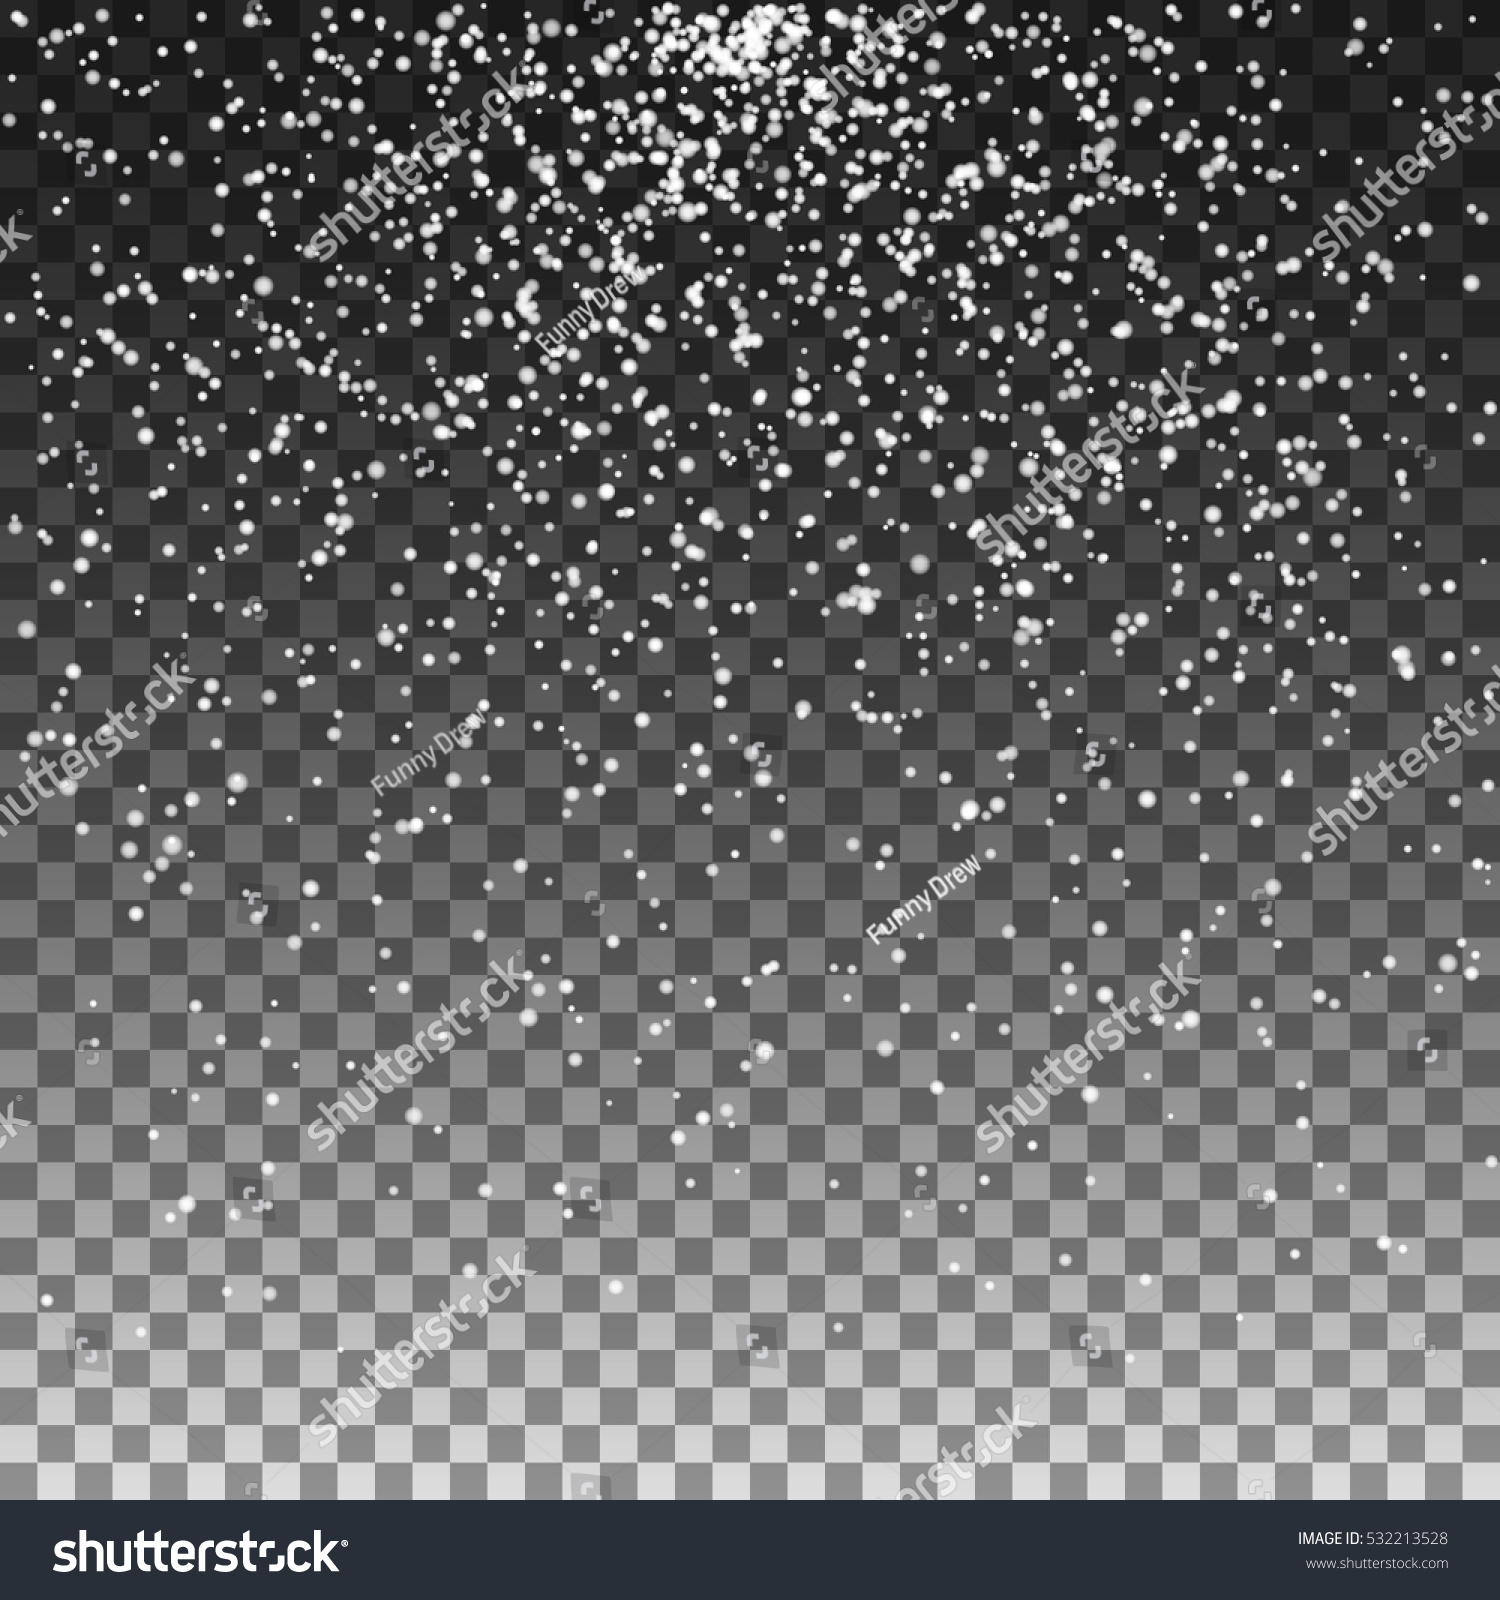 Snowfall Particles Design Transparent Background Vector Stock Vector